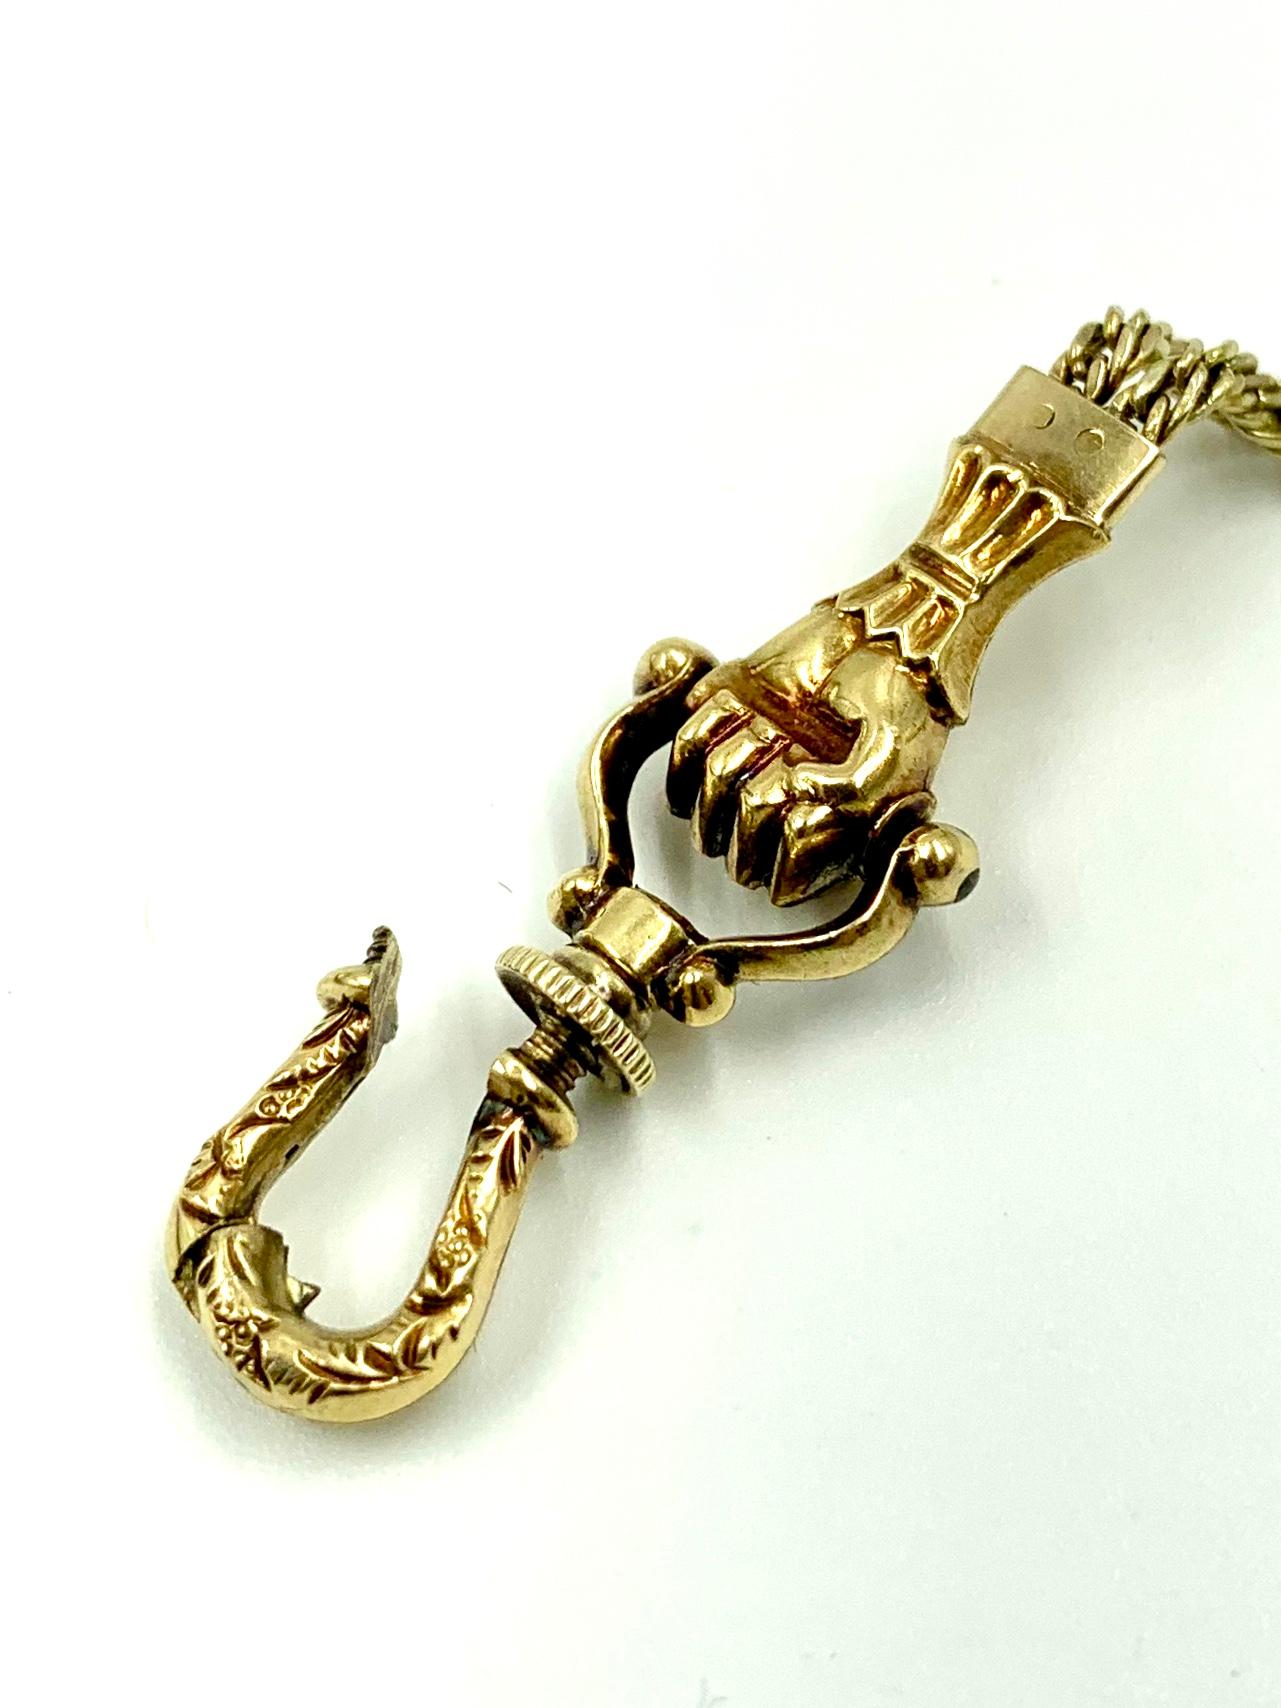 Exceptionally Long Antique 18K Gold Mano Sautoir Slide Chain Necklace Circa 1840 For Sale 1